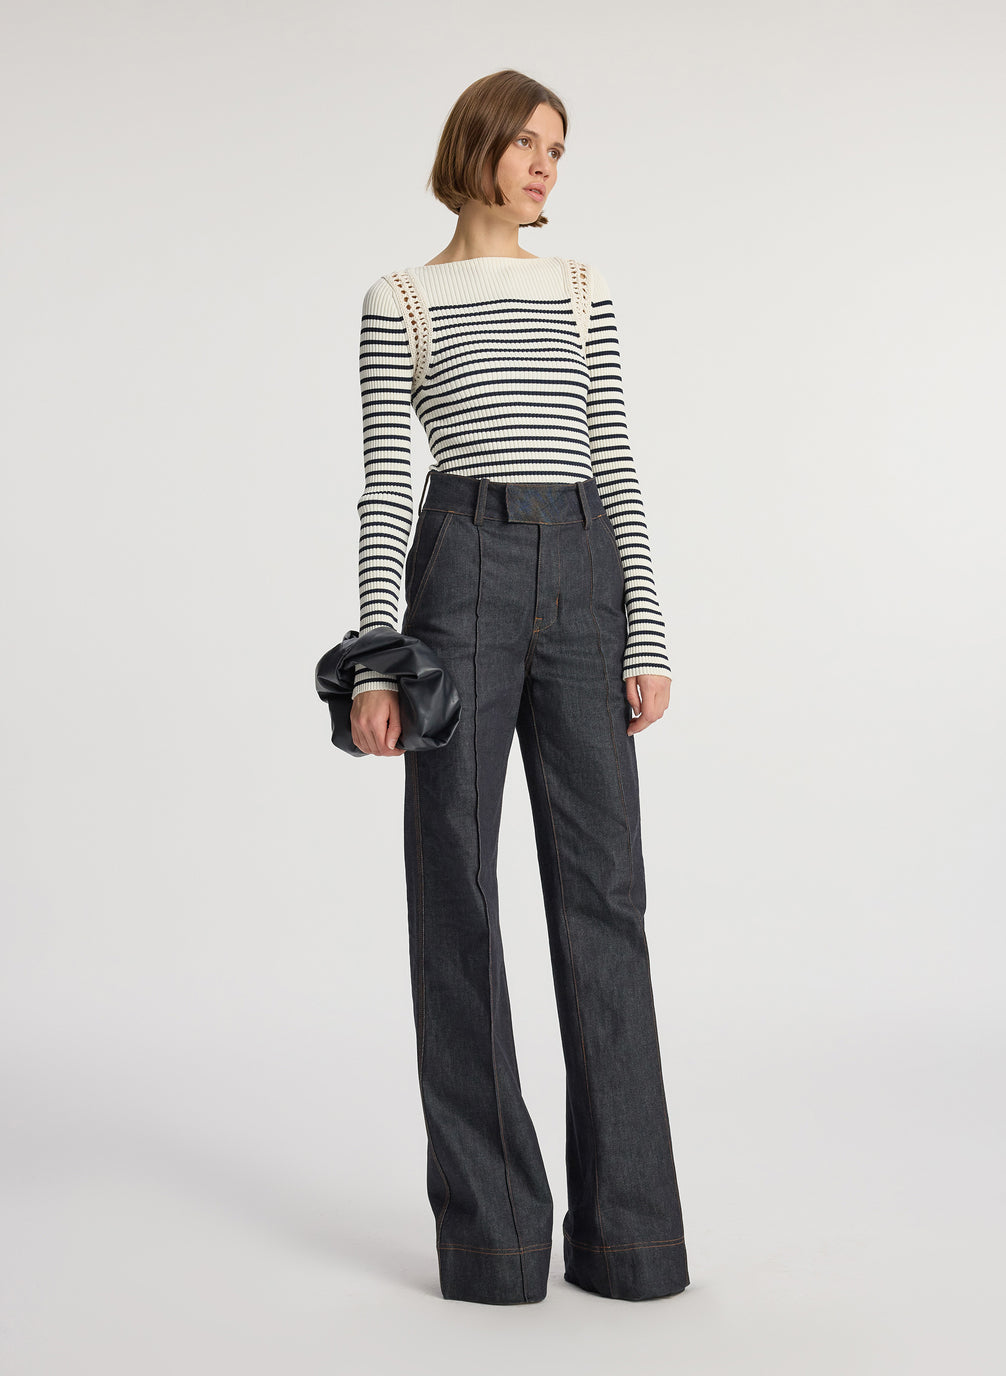 side view of woman wearing white and navy striped top with long bell sleeves and dark wash raw denim jeans